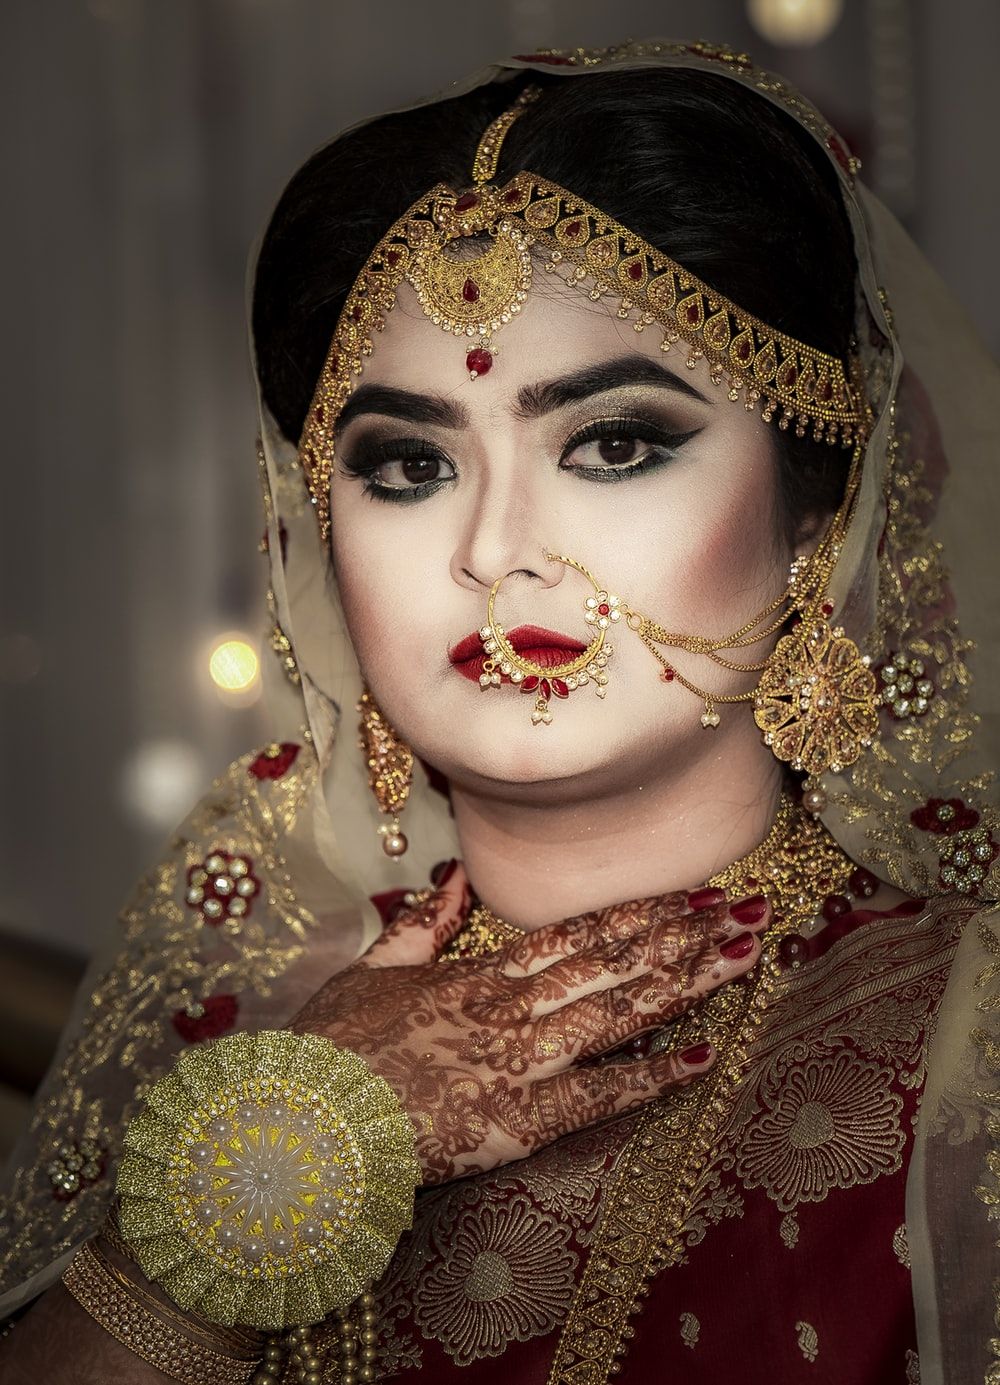 Bengali Woman Picture. Download Free Image